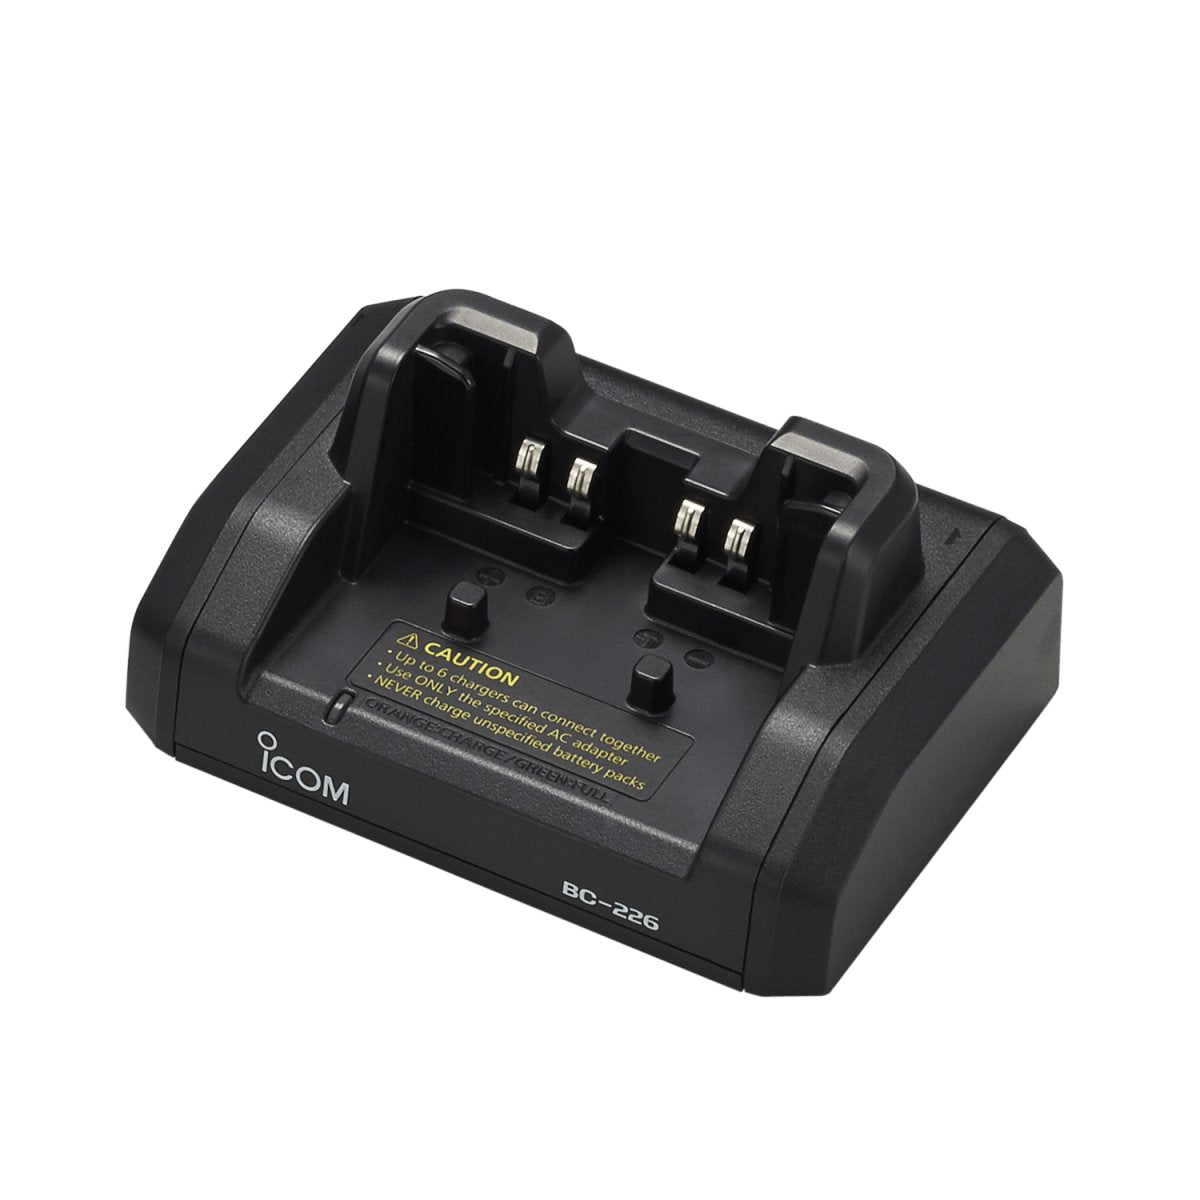 Icom BC226 Connectable charger-Icom-BC226